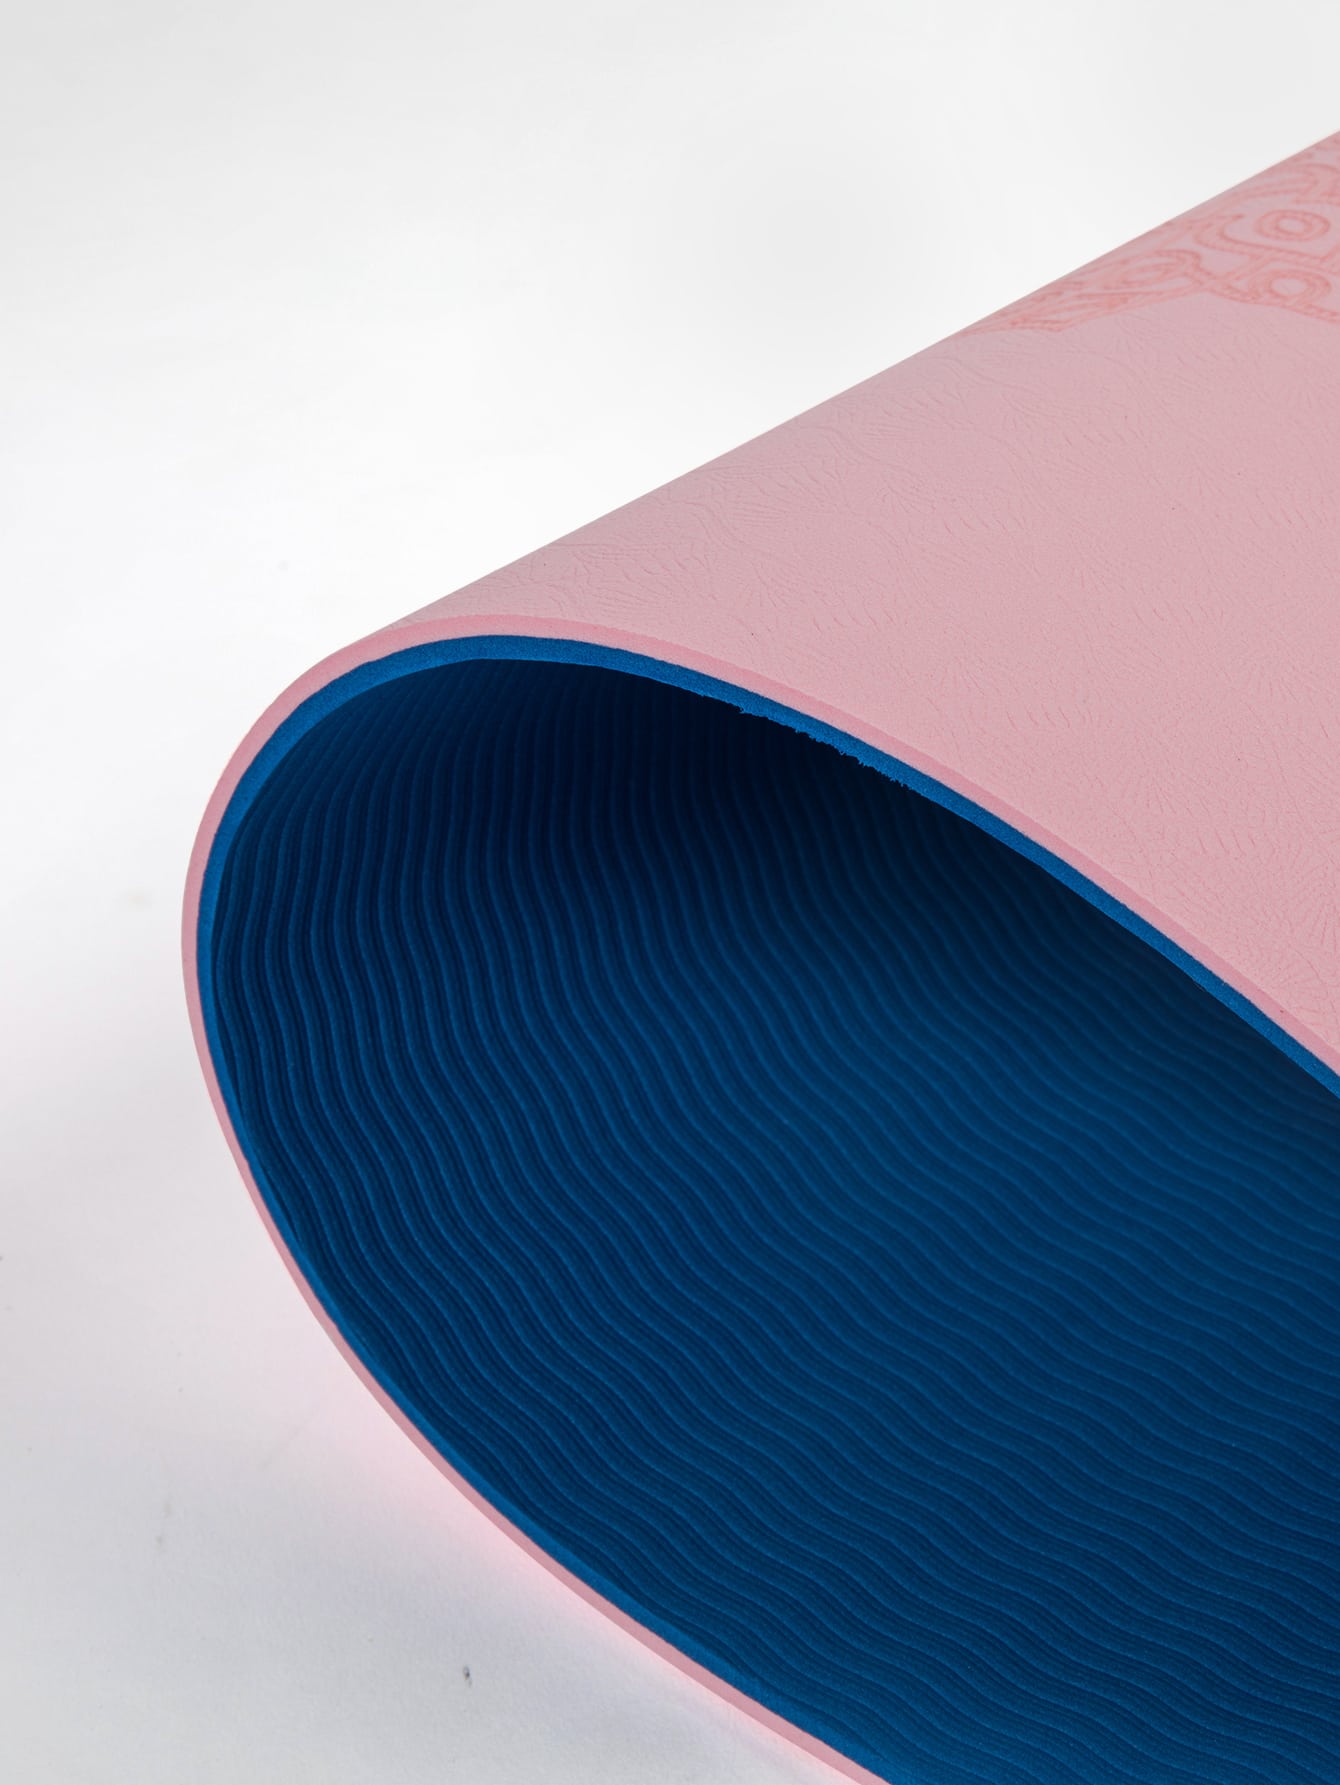 Thin Non Slip - Pink Yoga Mat Yoga and Meditation Products - Personal Hour